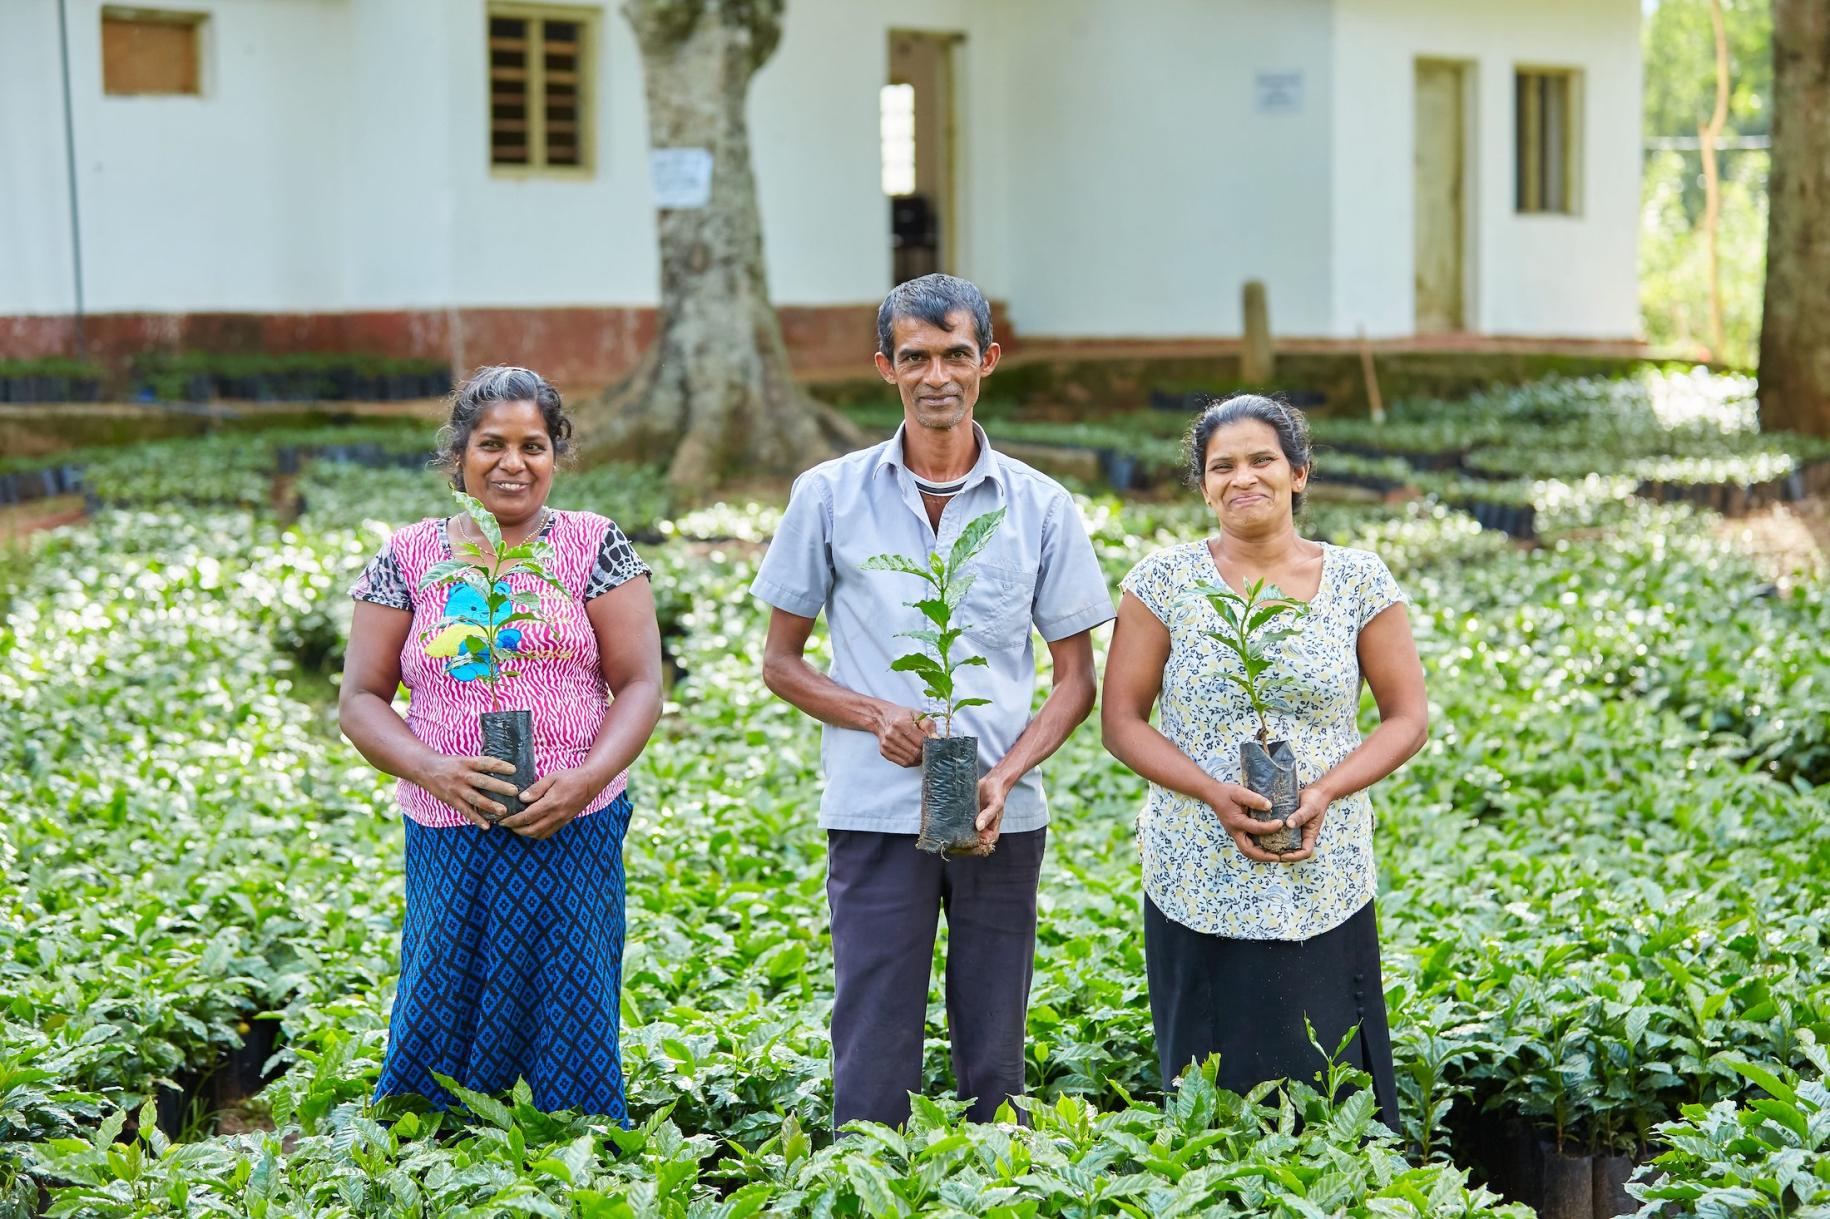 Two women and a man in the center hold plants and smile for the camera.